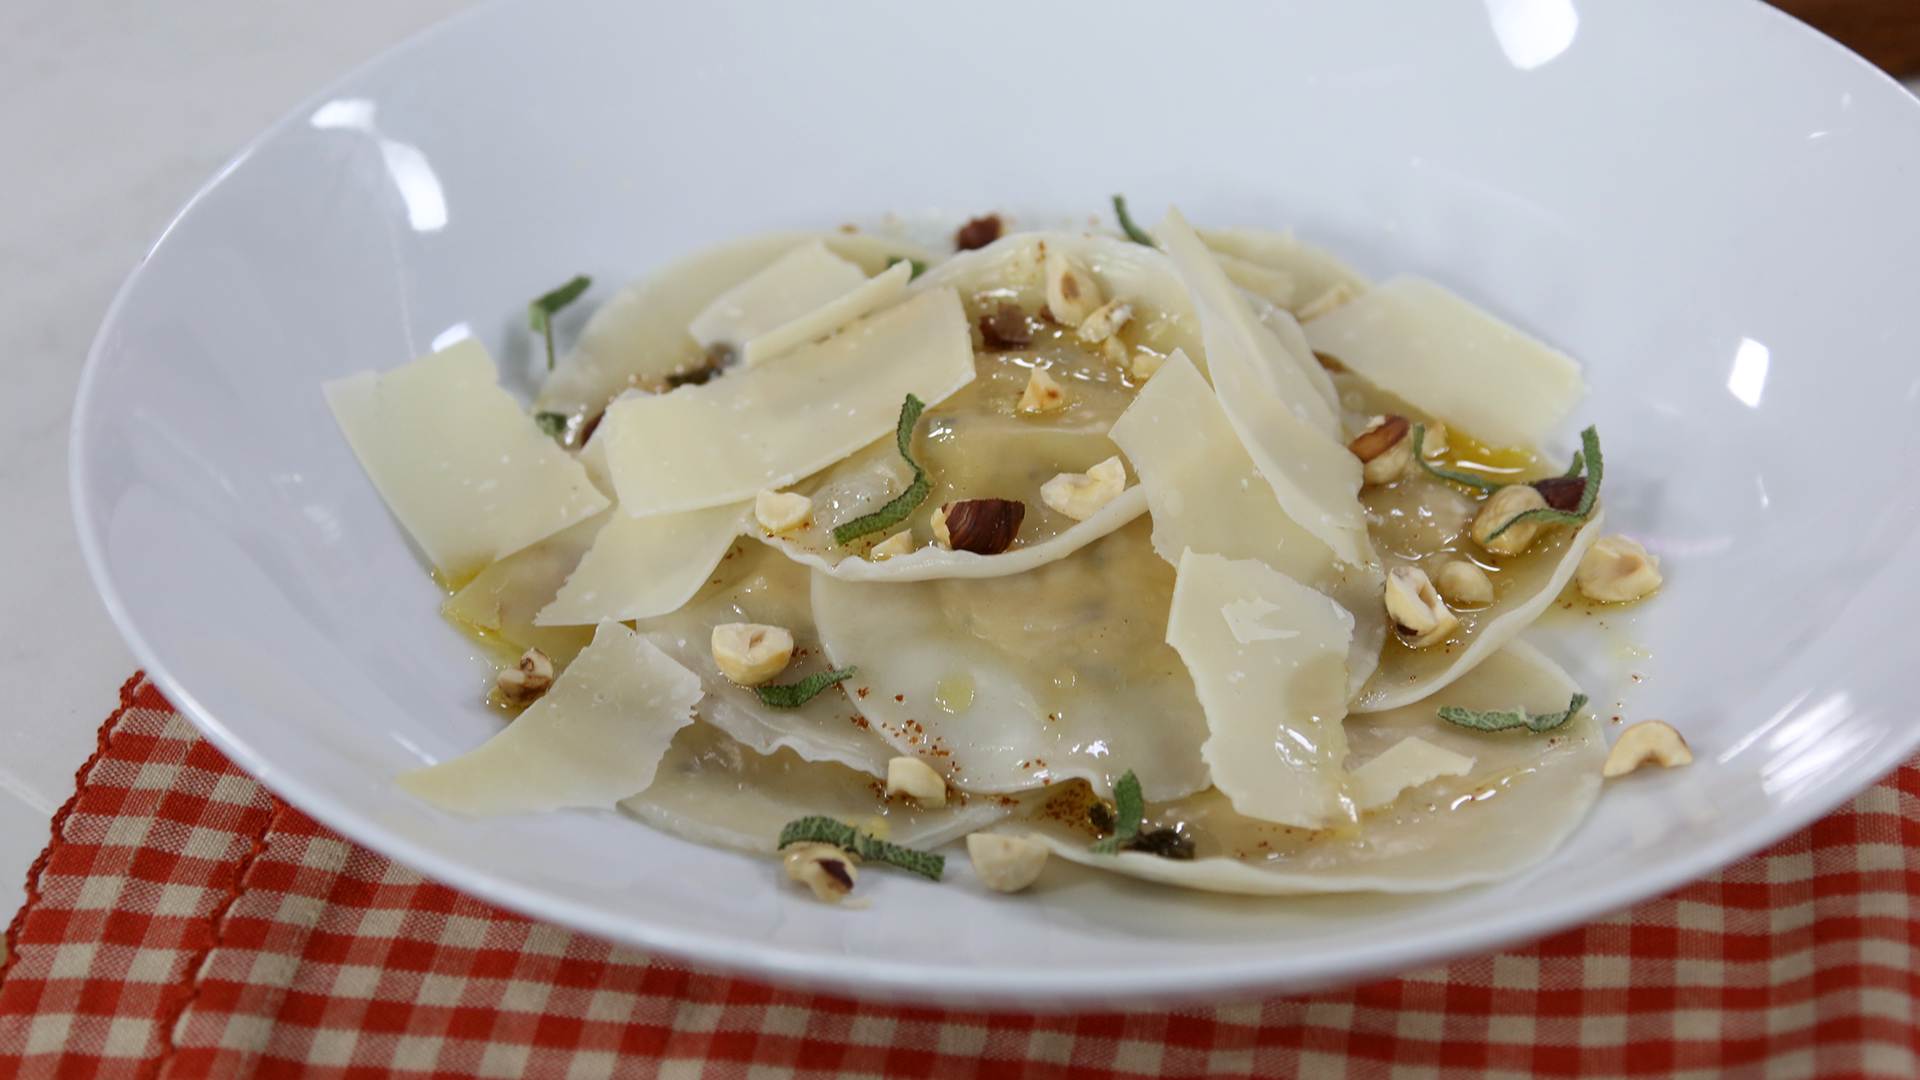 Roasted pumpkin ravioli with brown butter and hazelnuts